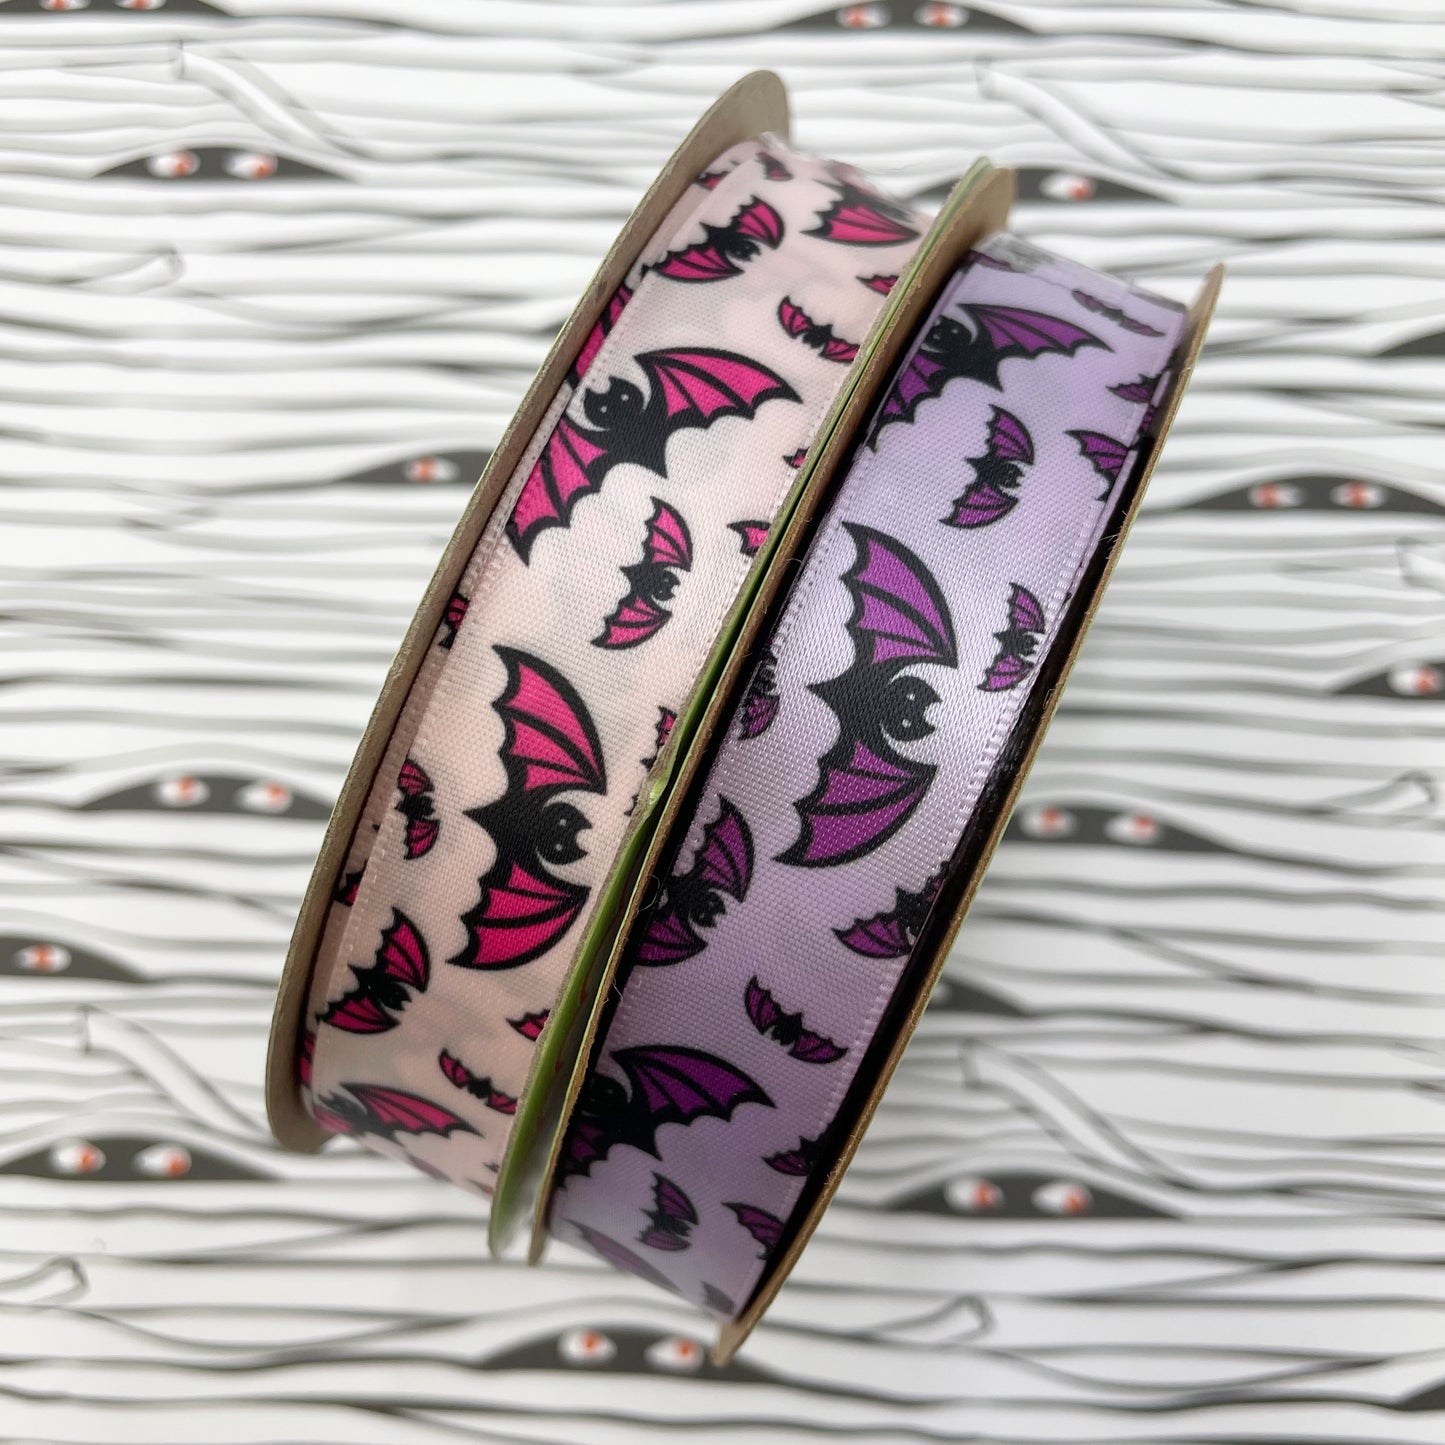 Black bat ribbon for Halloween black bats with hot pink wings printed on 5/8" light orchid or light pink satin